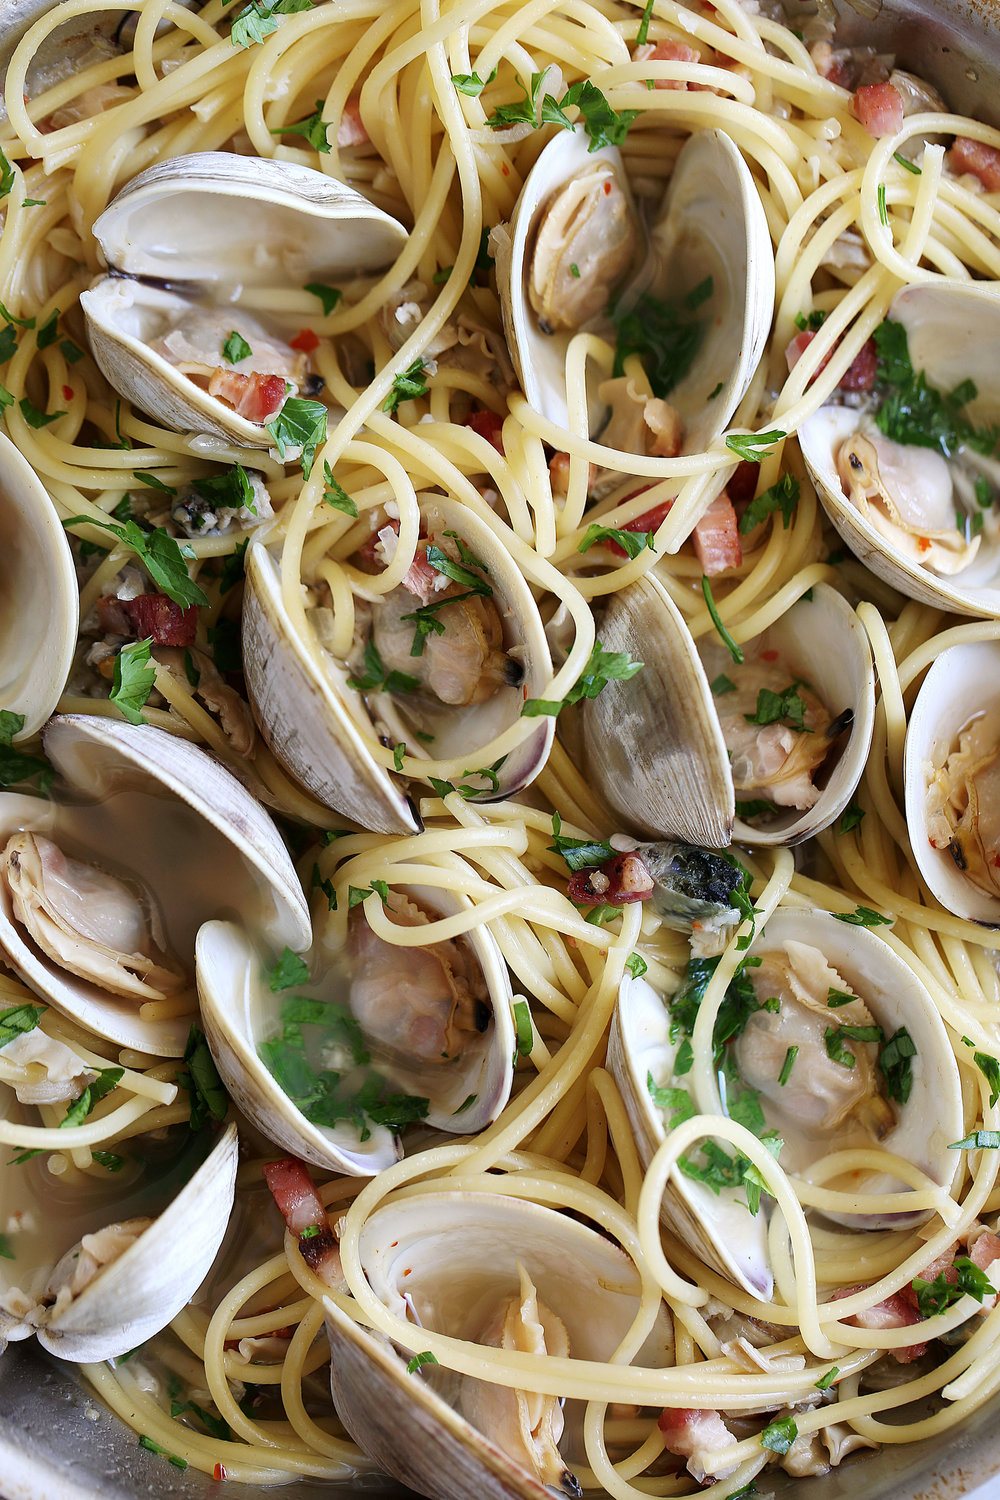 spaghetti alle vongole steamed clams opened with pancetta garnished with parsley